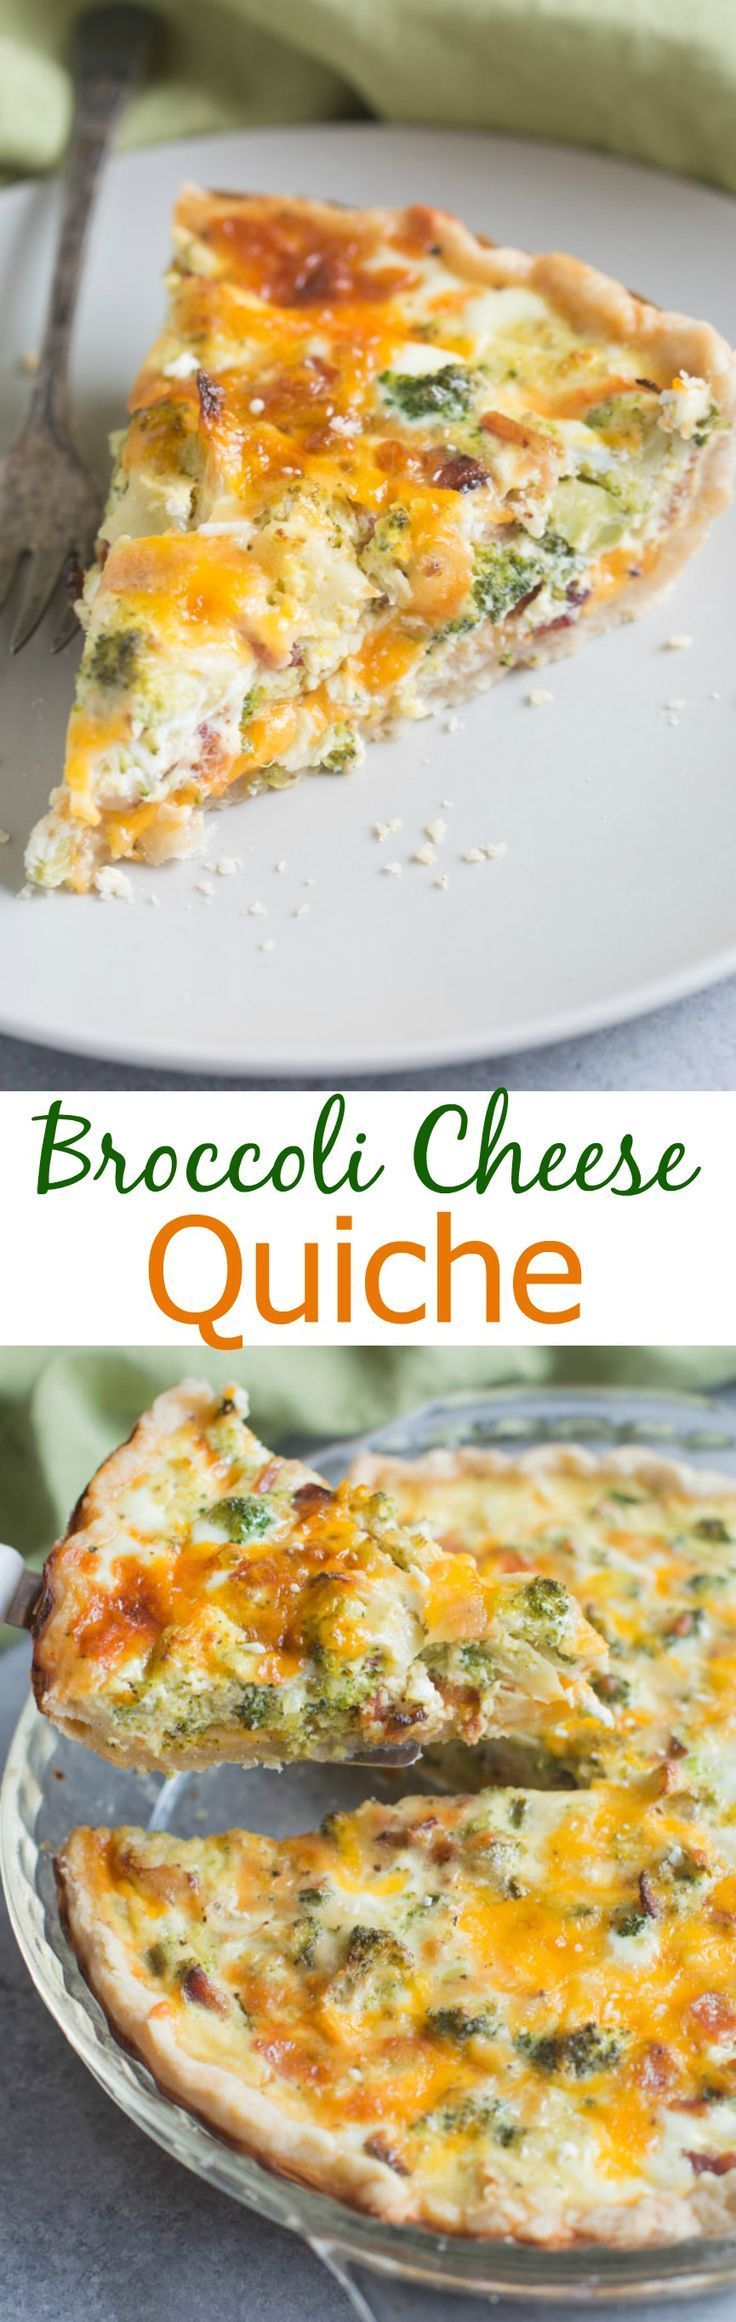 Broccoli Cheese Quiche made in my favorite homemade pie crust. Family and…